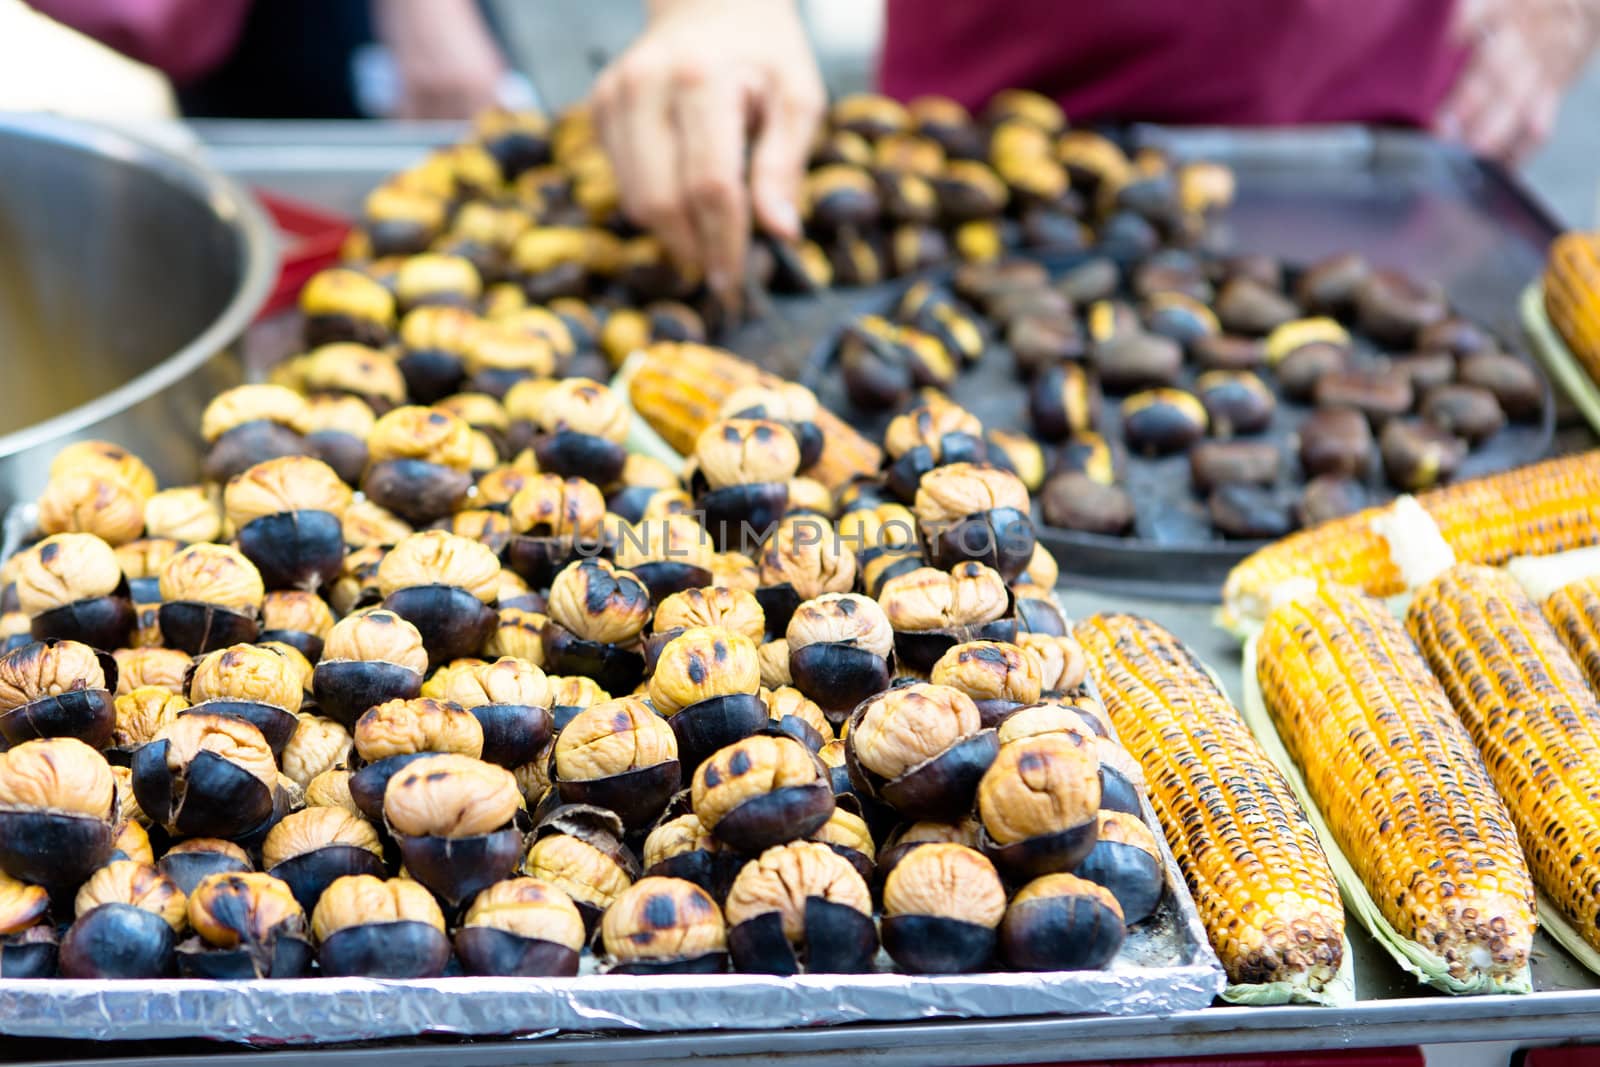 Chestnuts and Corns by coskun